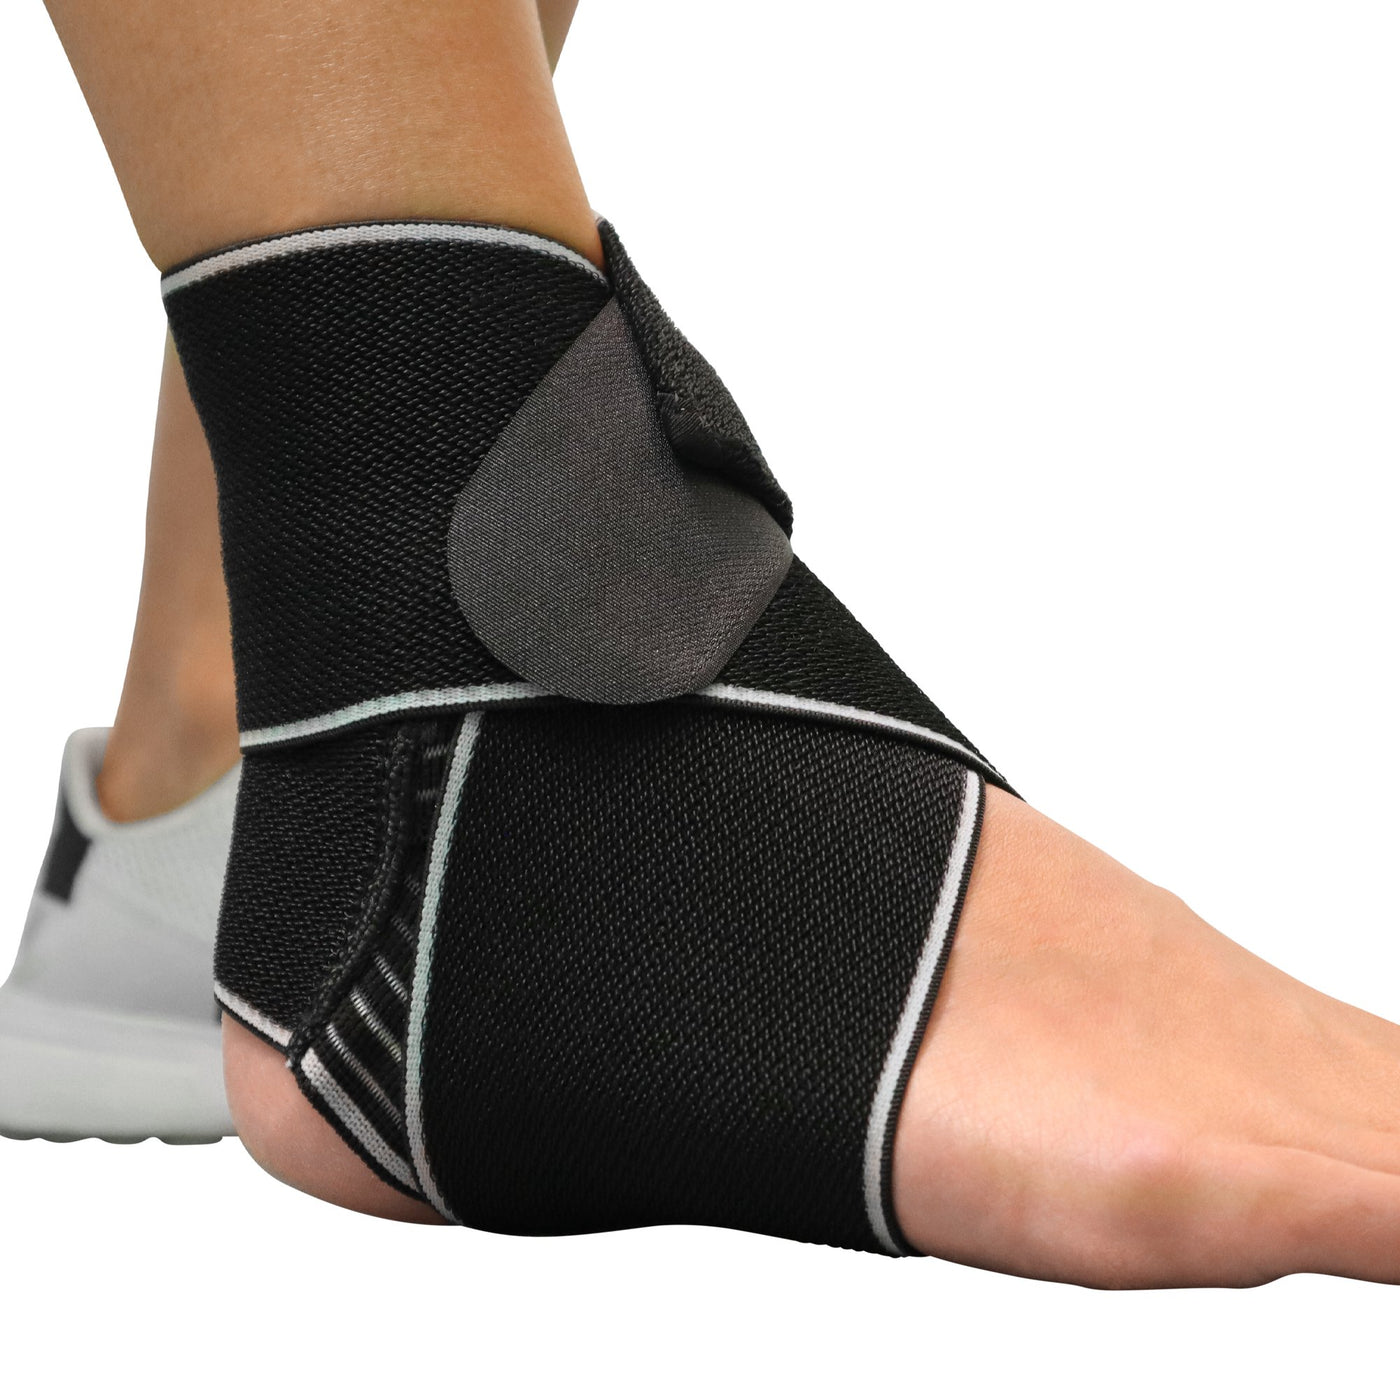 Best Ankle Brace for Support and Comfort | Girlboss